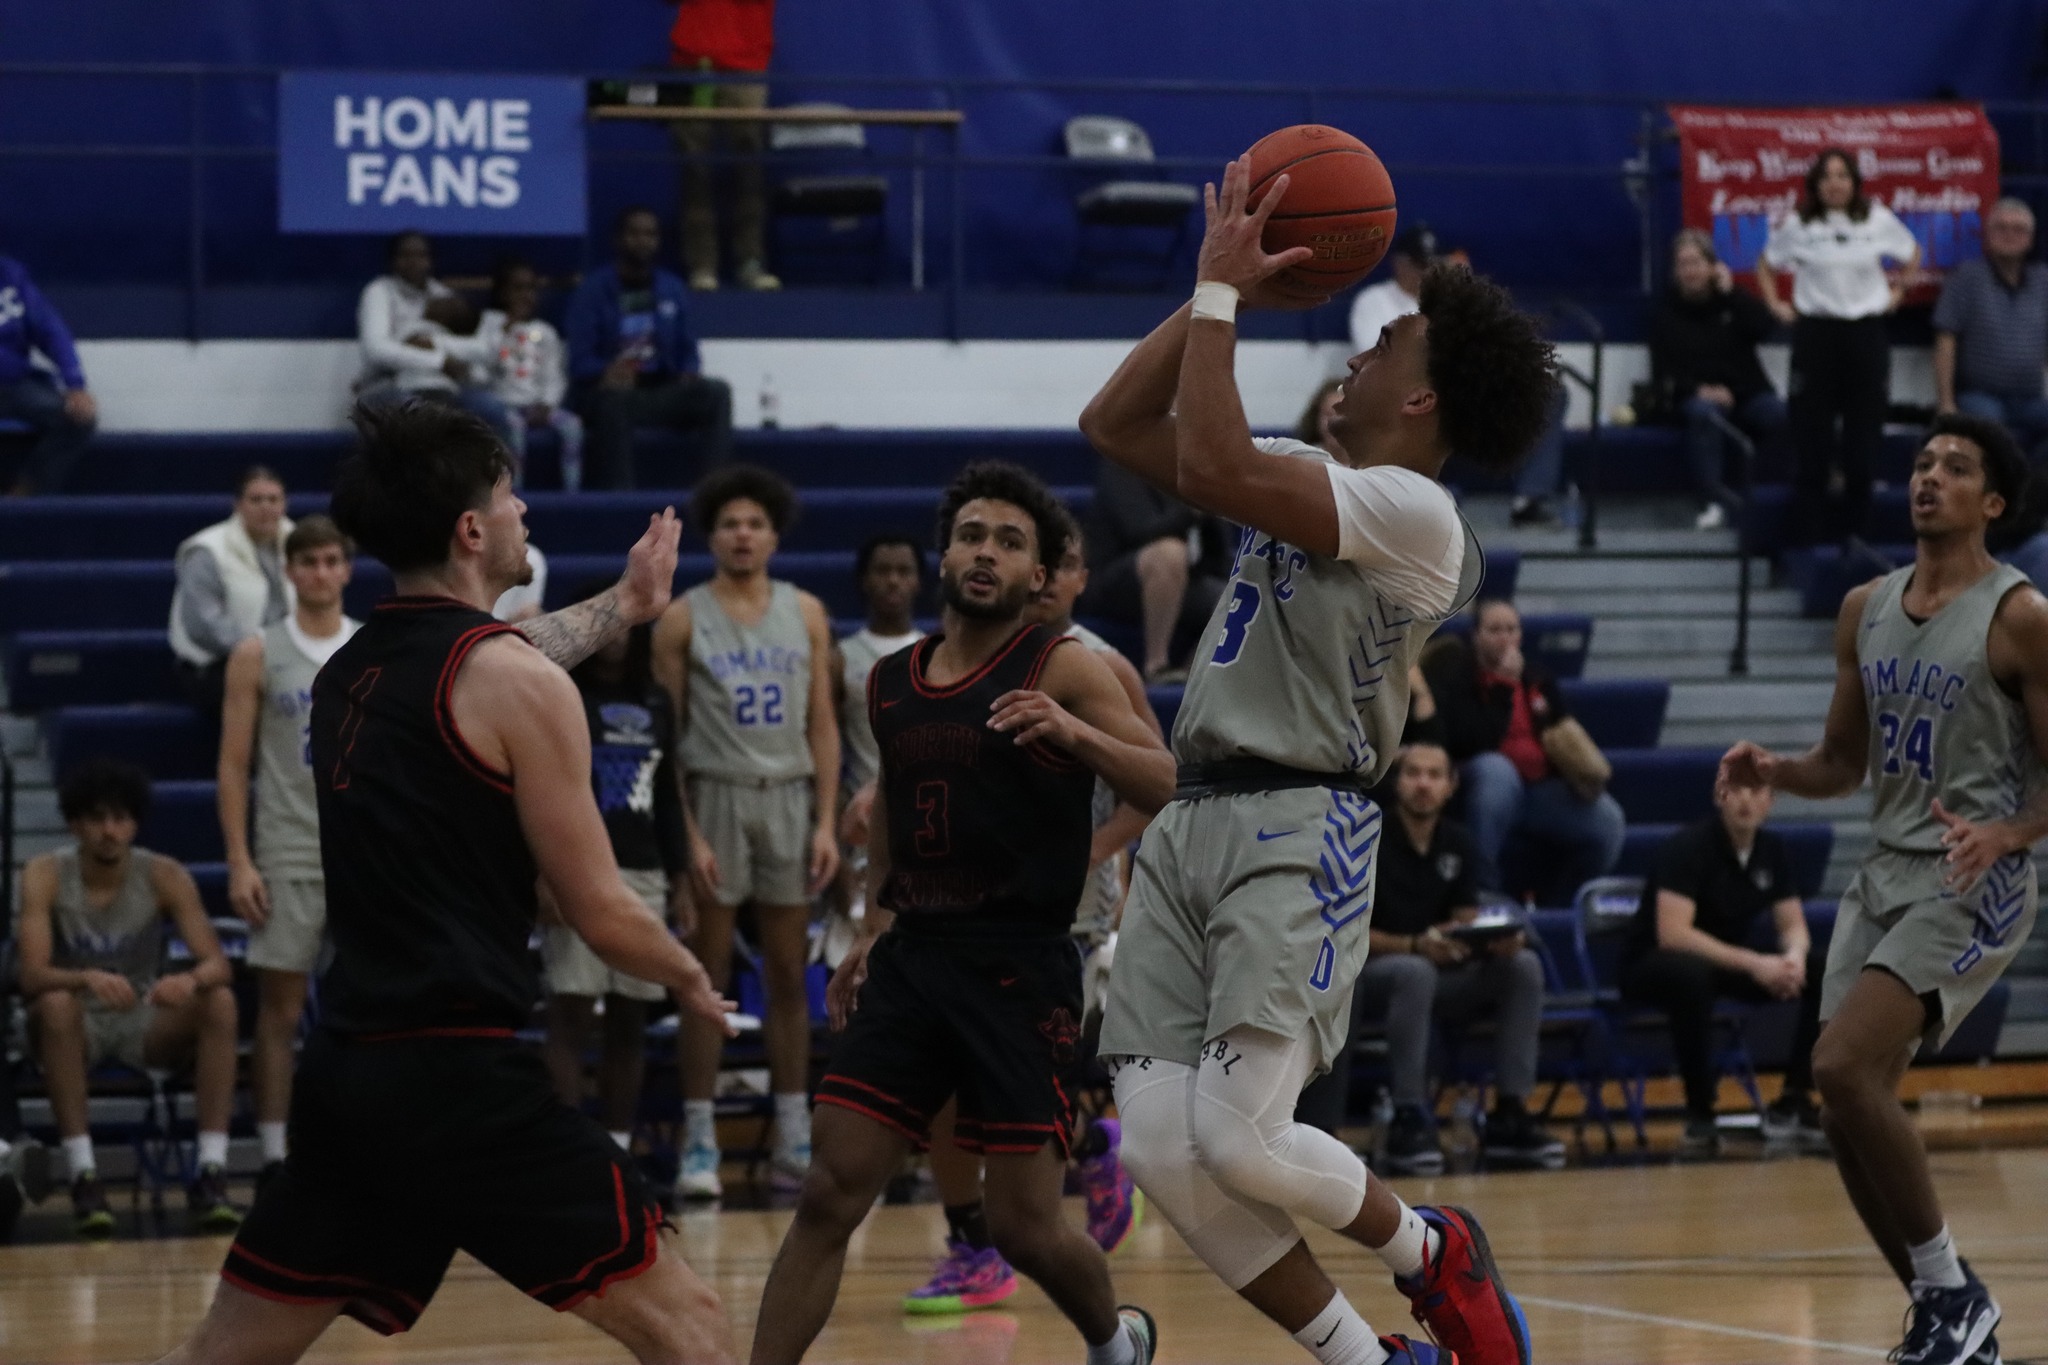 DMACC men's basketball team takes 90-76 decision from ICCC